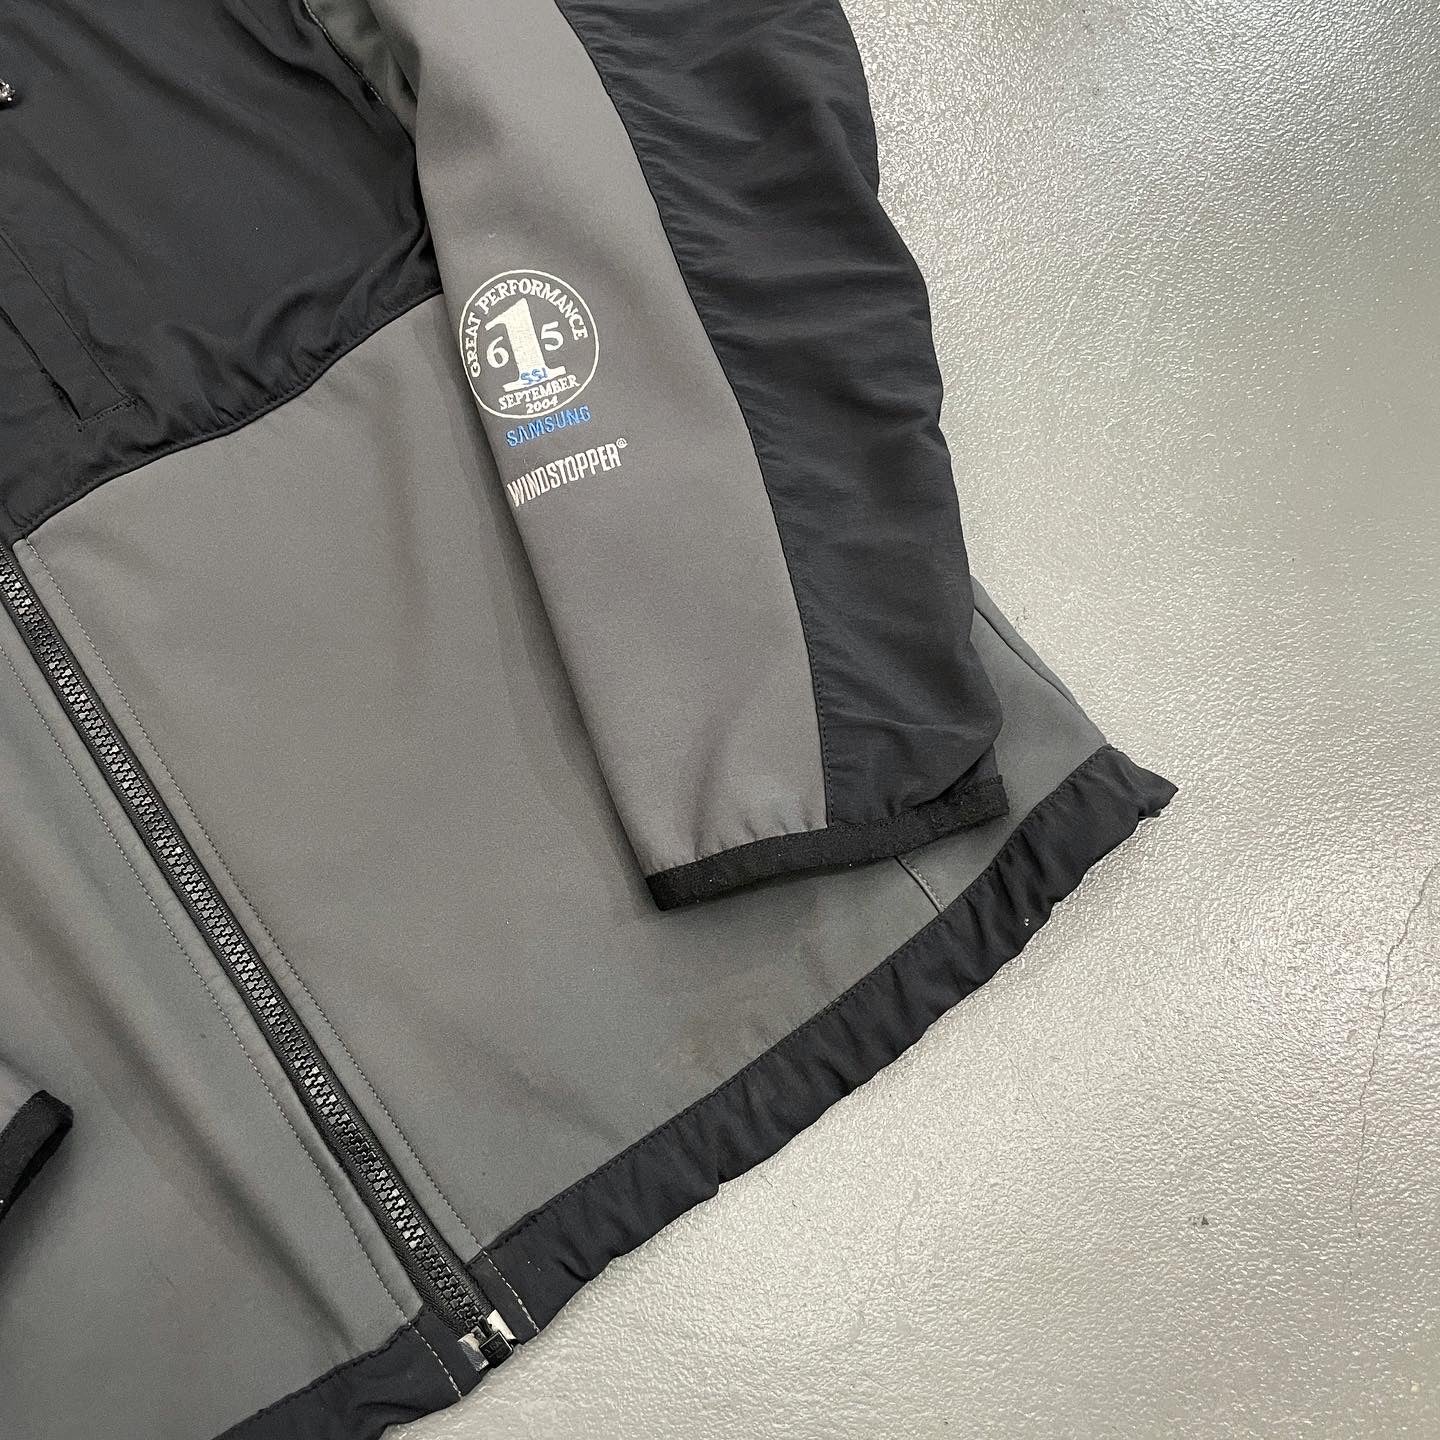 The North Face x Samsung Wind Stopper Full Zip Jacket